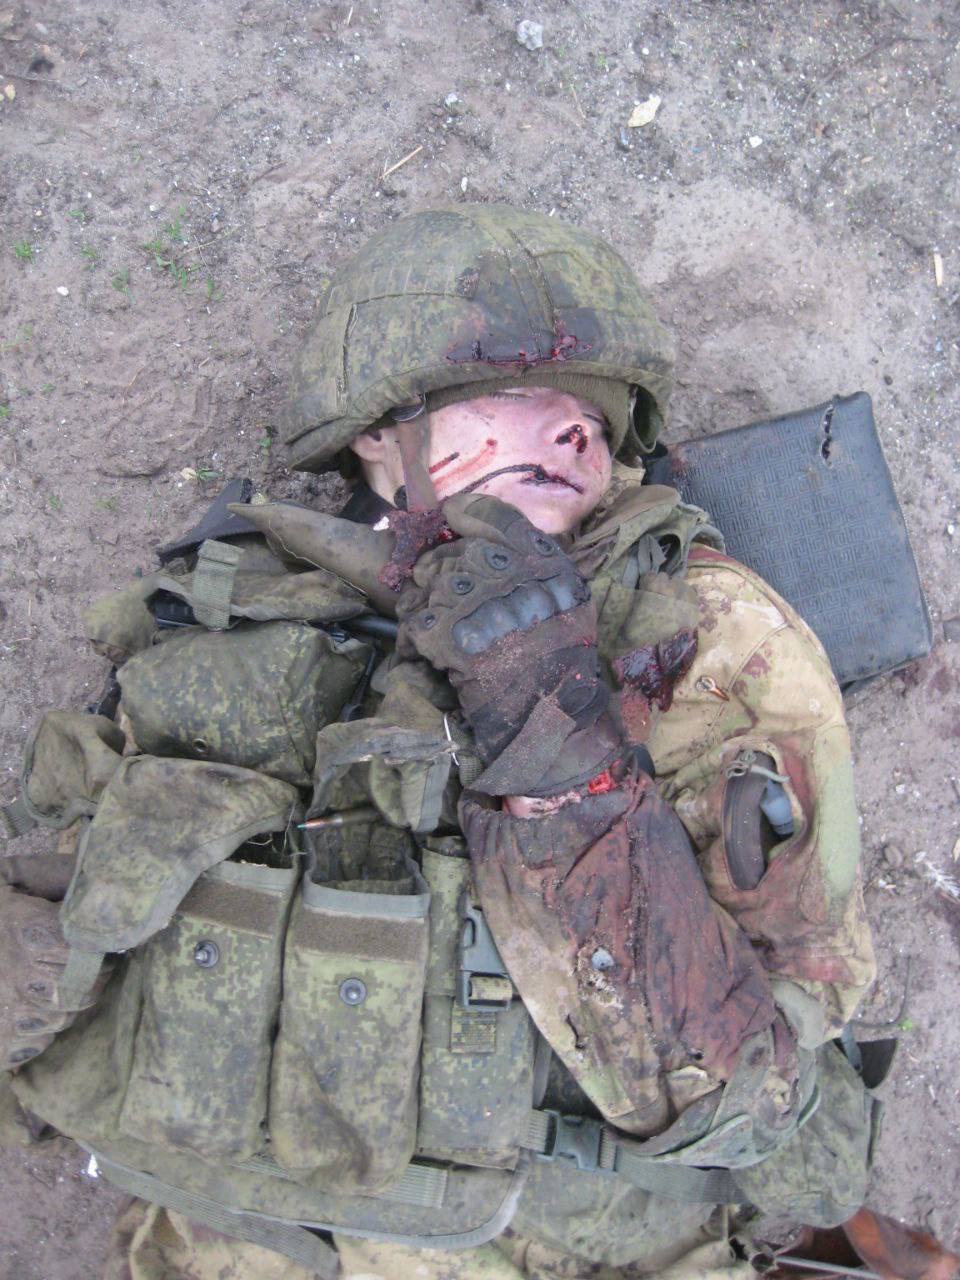 Corpse of Russian soldier